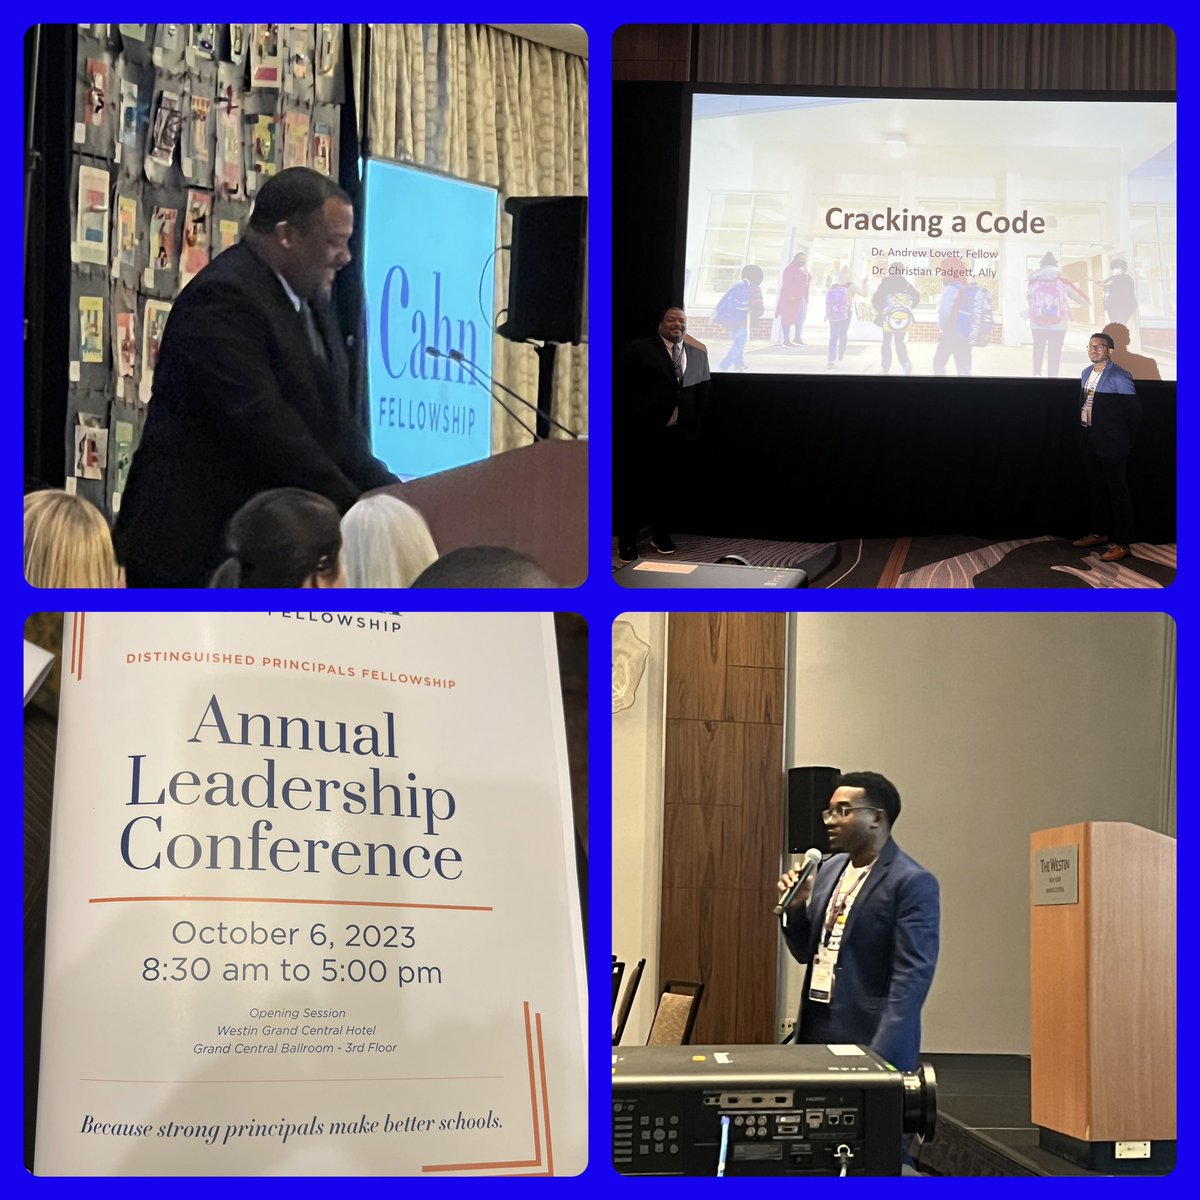 Had two opportunities to hear the inspiring & hilarious @docdrewlovett today @CahnFellowship annual leadership conference today. He and his ally Dr. Padgett knocked it out of the park!